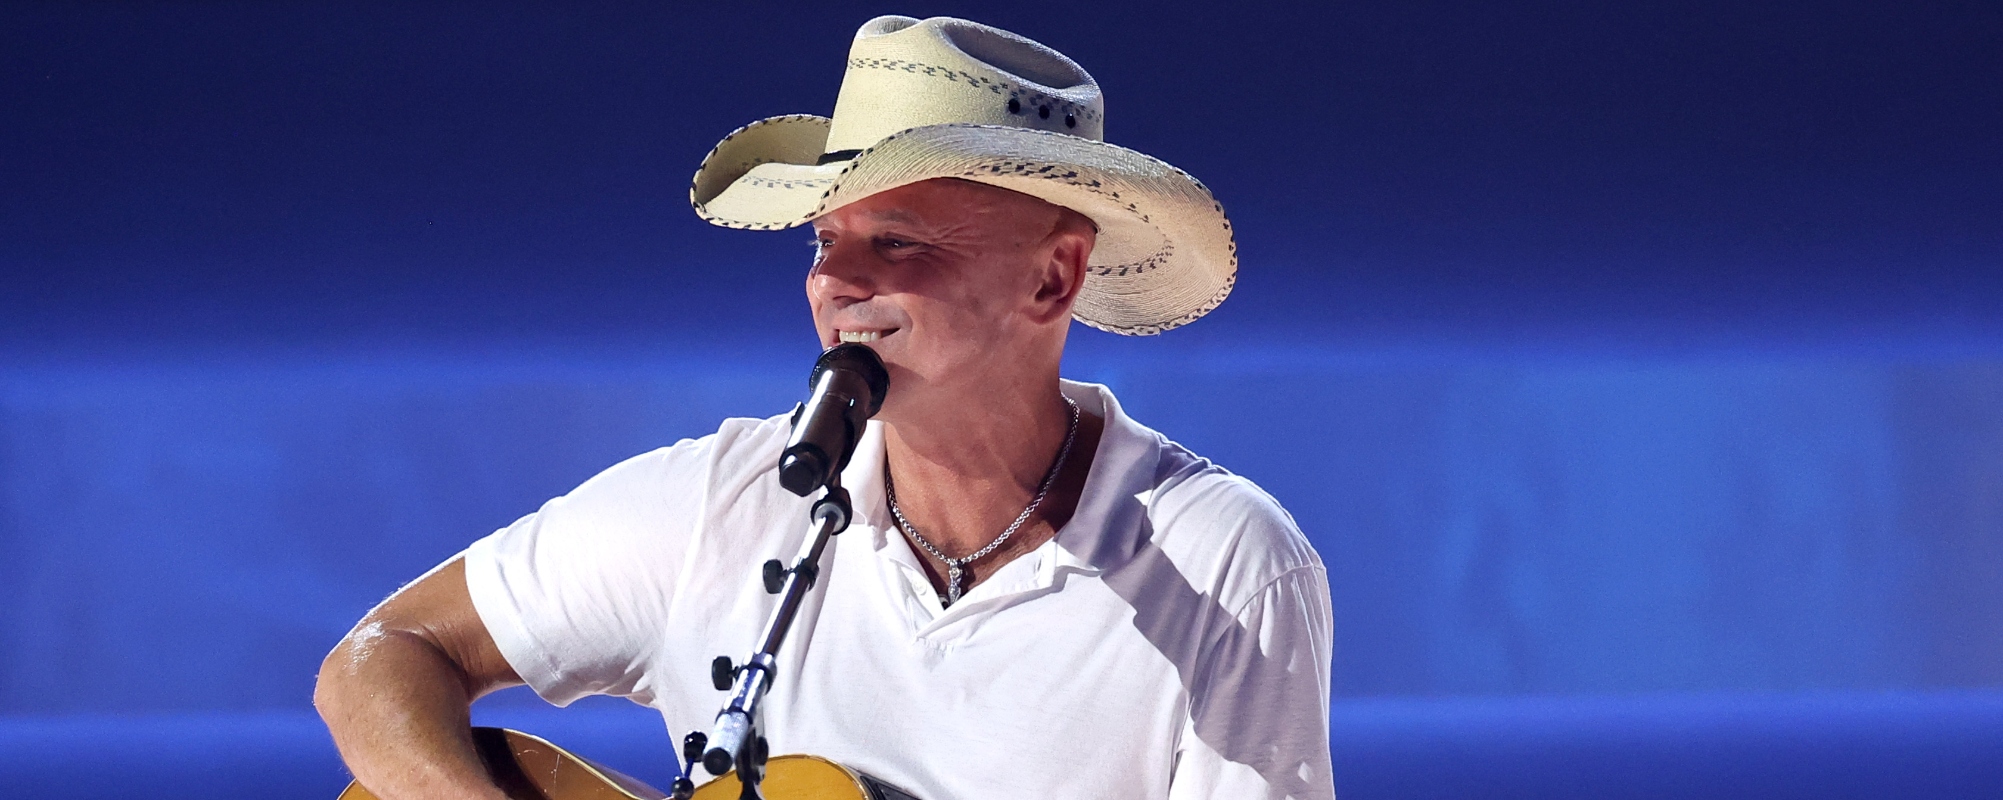 In True Kenny Chesney Fashion, the Country Star Wishes Fans a Merry Christmas During a Festive Beach Outing